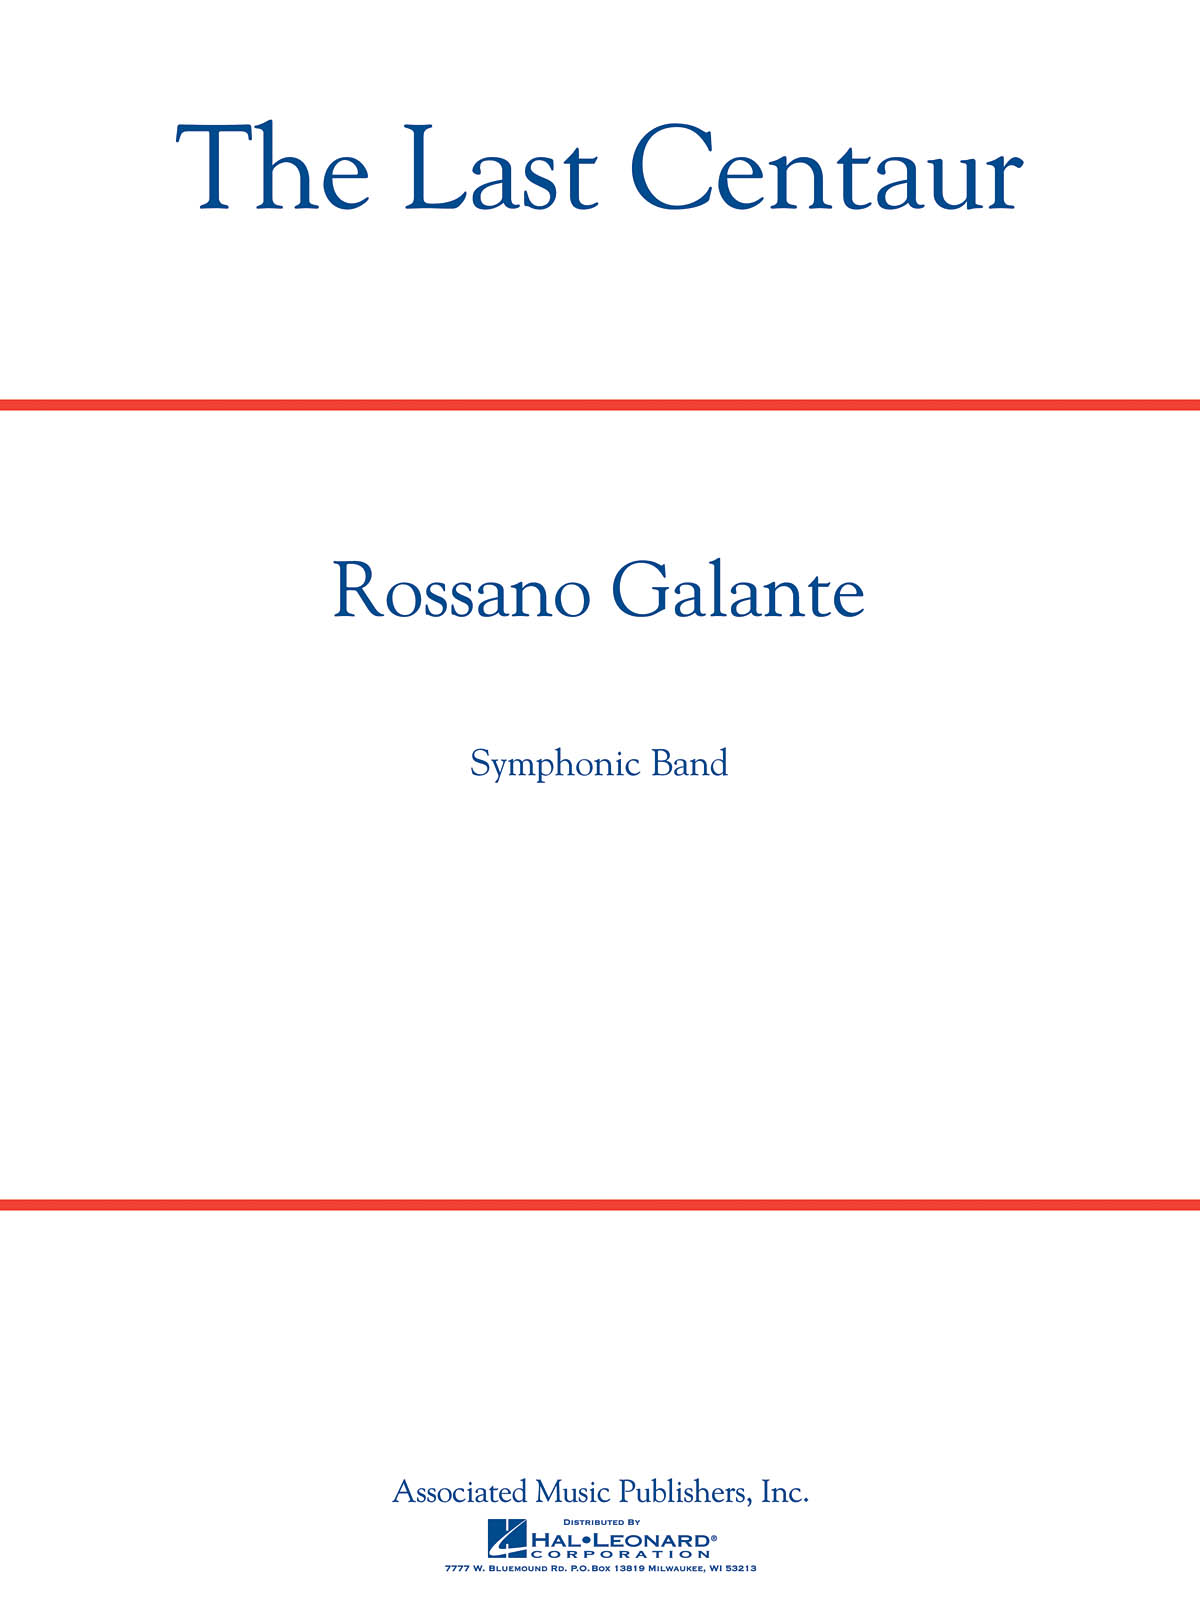 Rossano Galante: The Last Centaur: Concert Band: Score and Parts